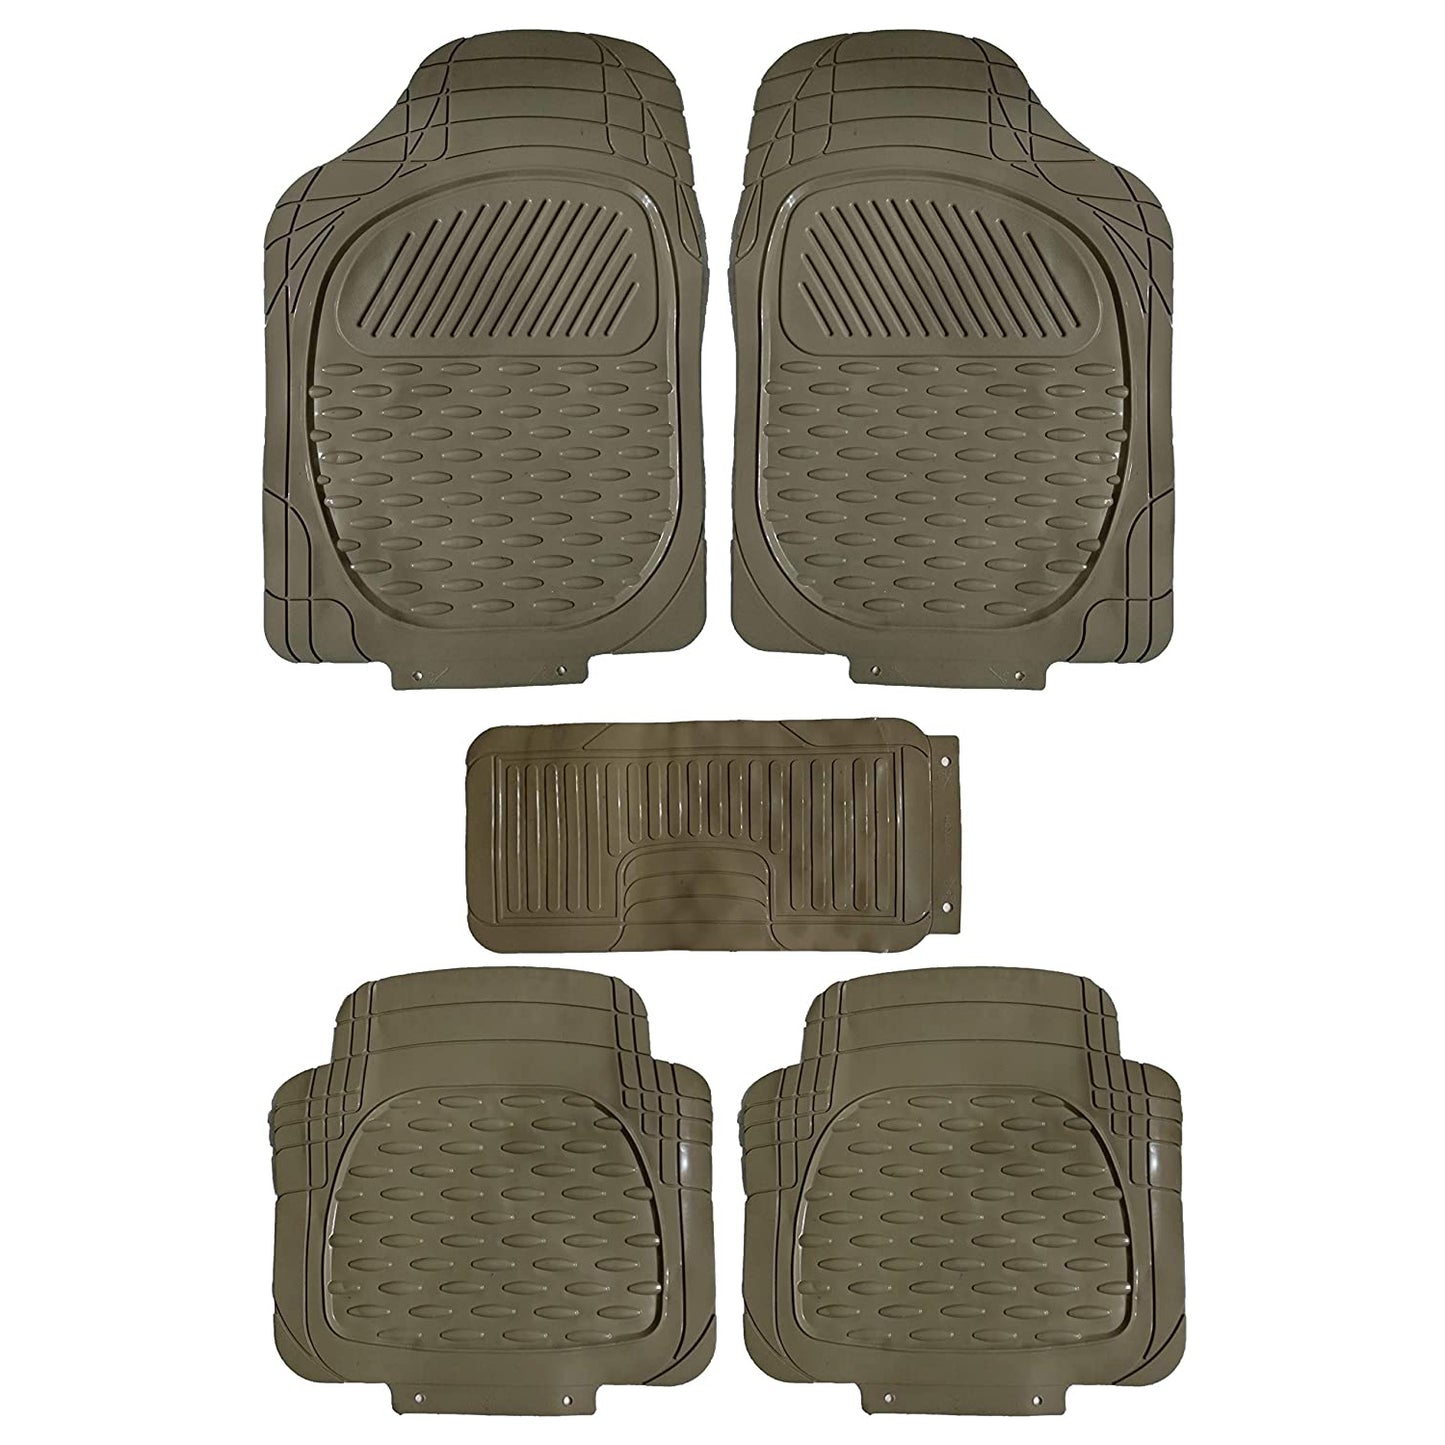 Universal Fit Auto Car Floor Mats Carpet Japanese Tattoo Car Floor Mats  with Anti-Slip Heel Pad Automotive Car Mat Full Set of 4 Pieces Fit for SUV